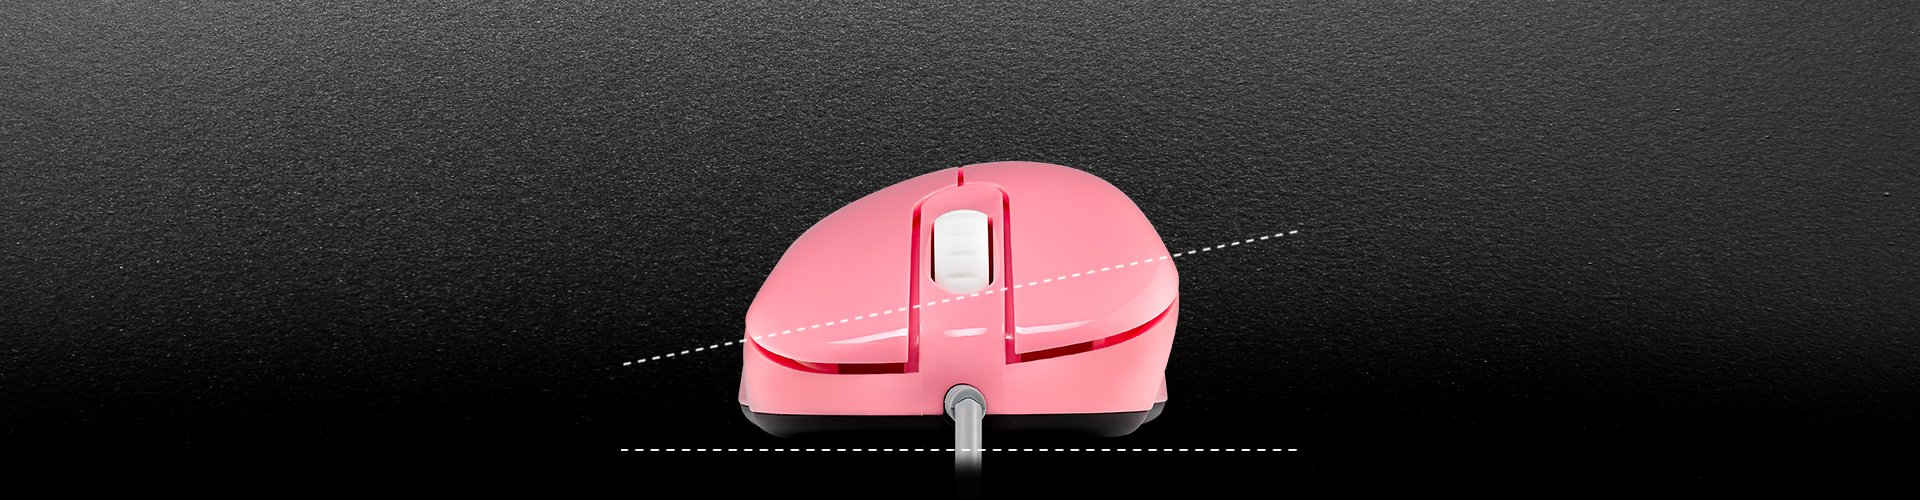 zowie-esports-gaming-mouse-ec2-b-divina-pink-non-symmetrical-design